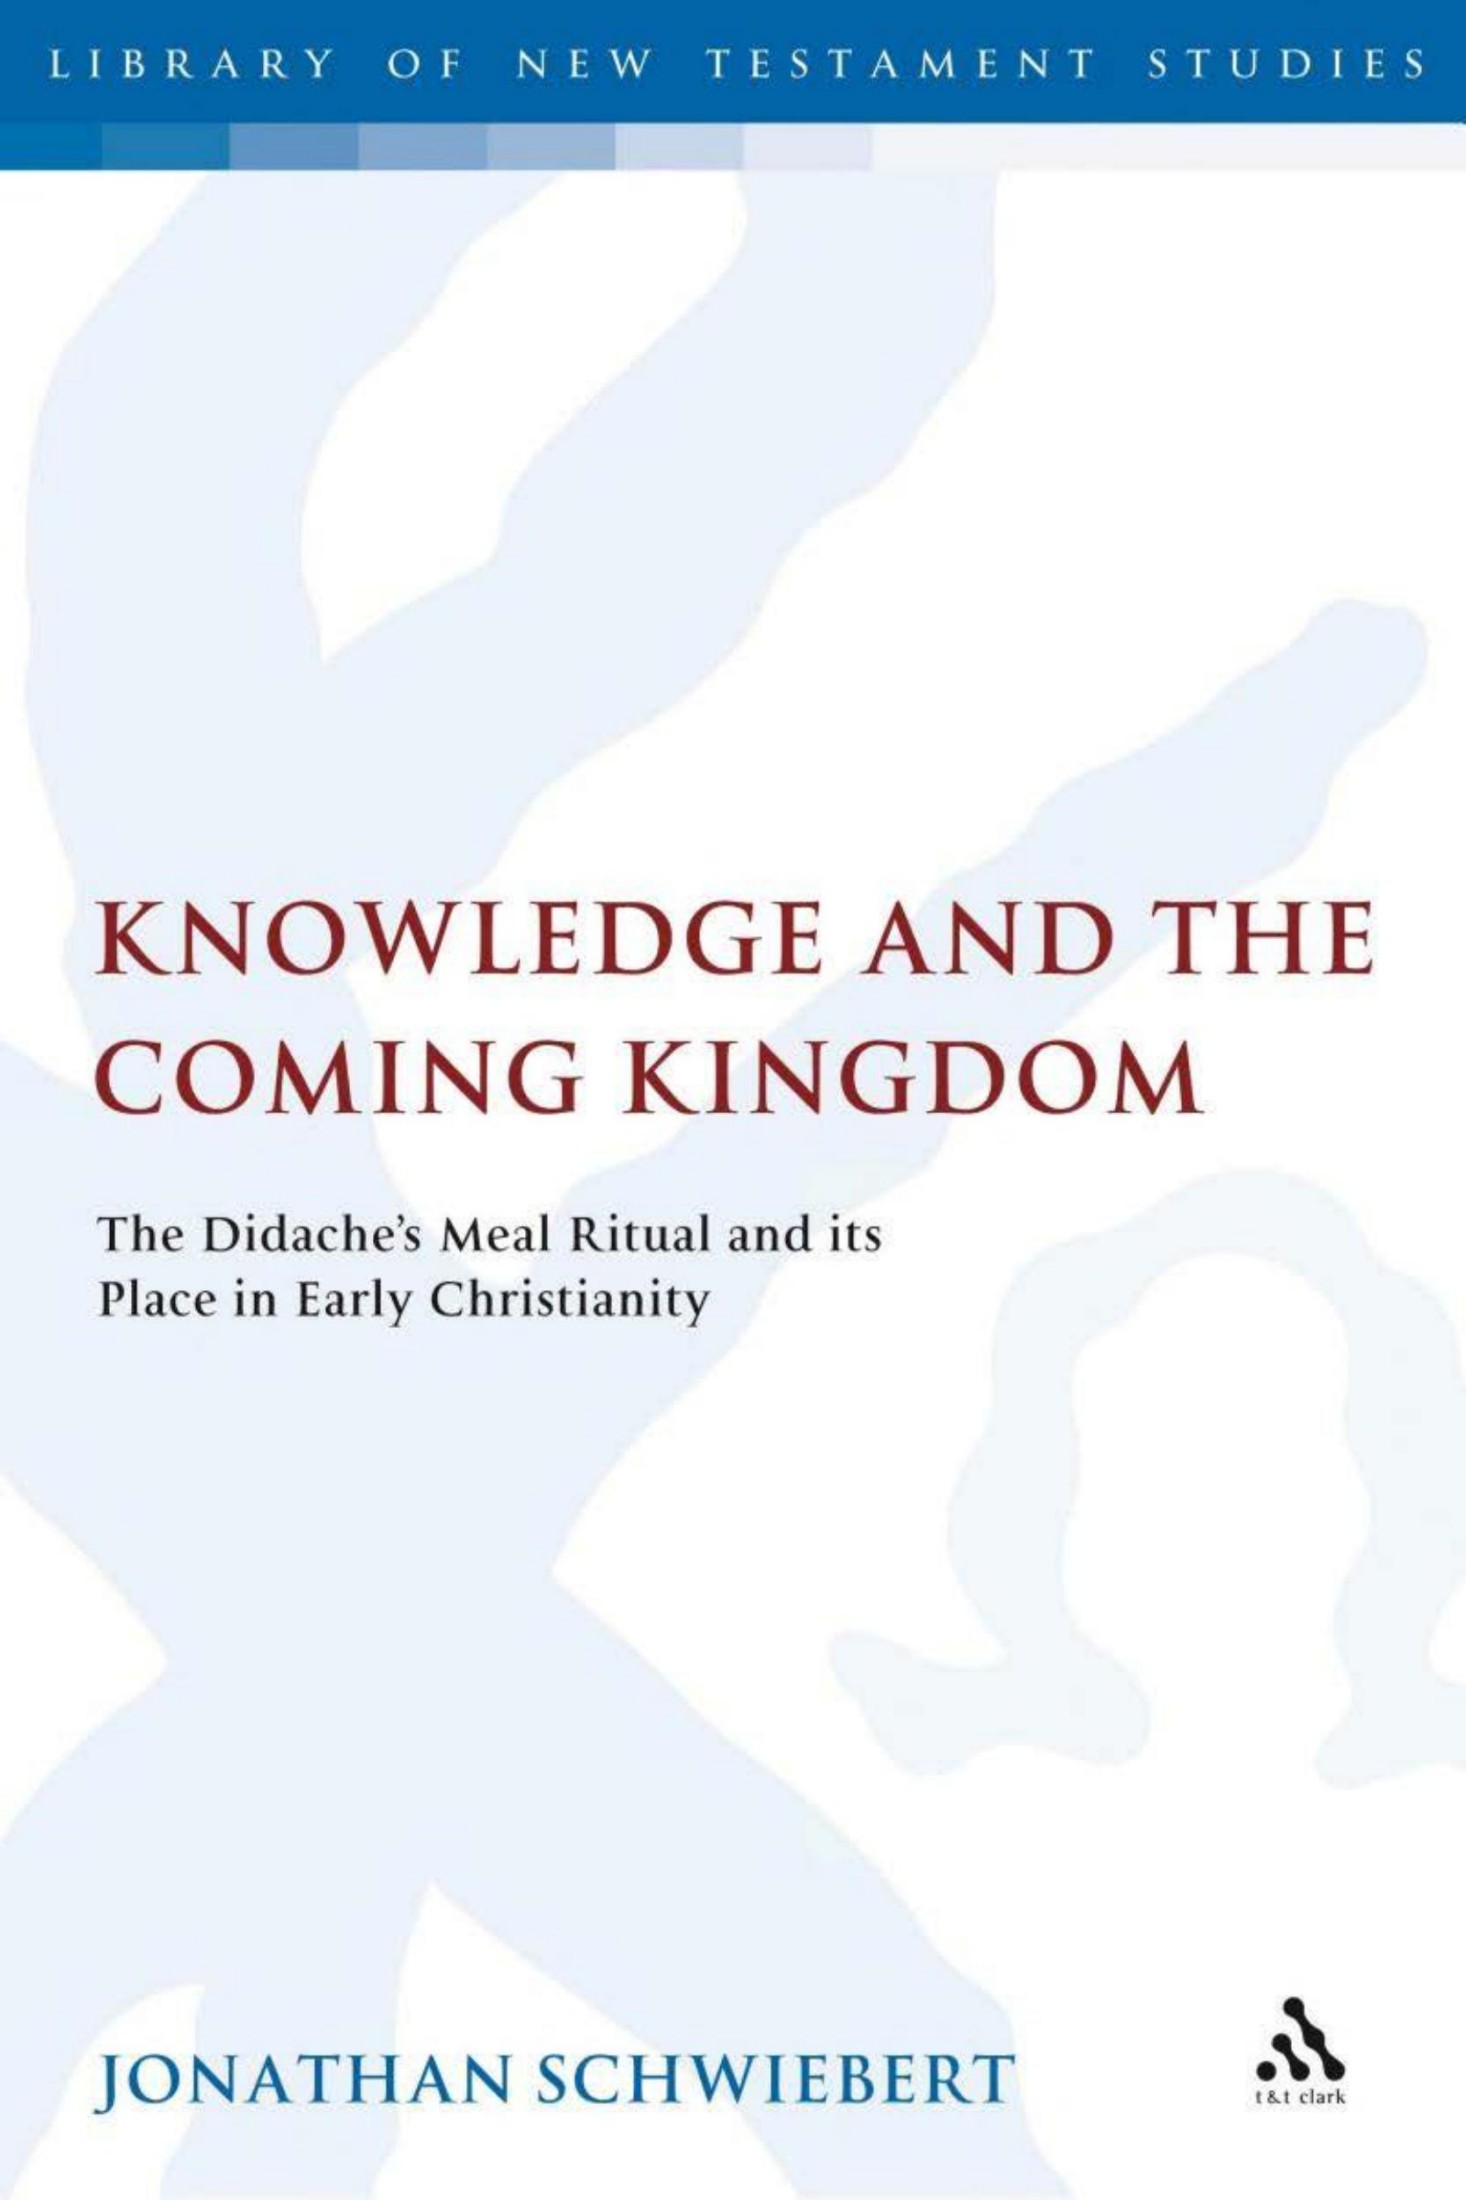 Knowledge and the Coming Kingdom: The Didache's Meal Ritual and Its Place in Early Christianity